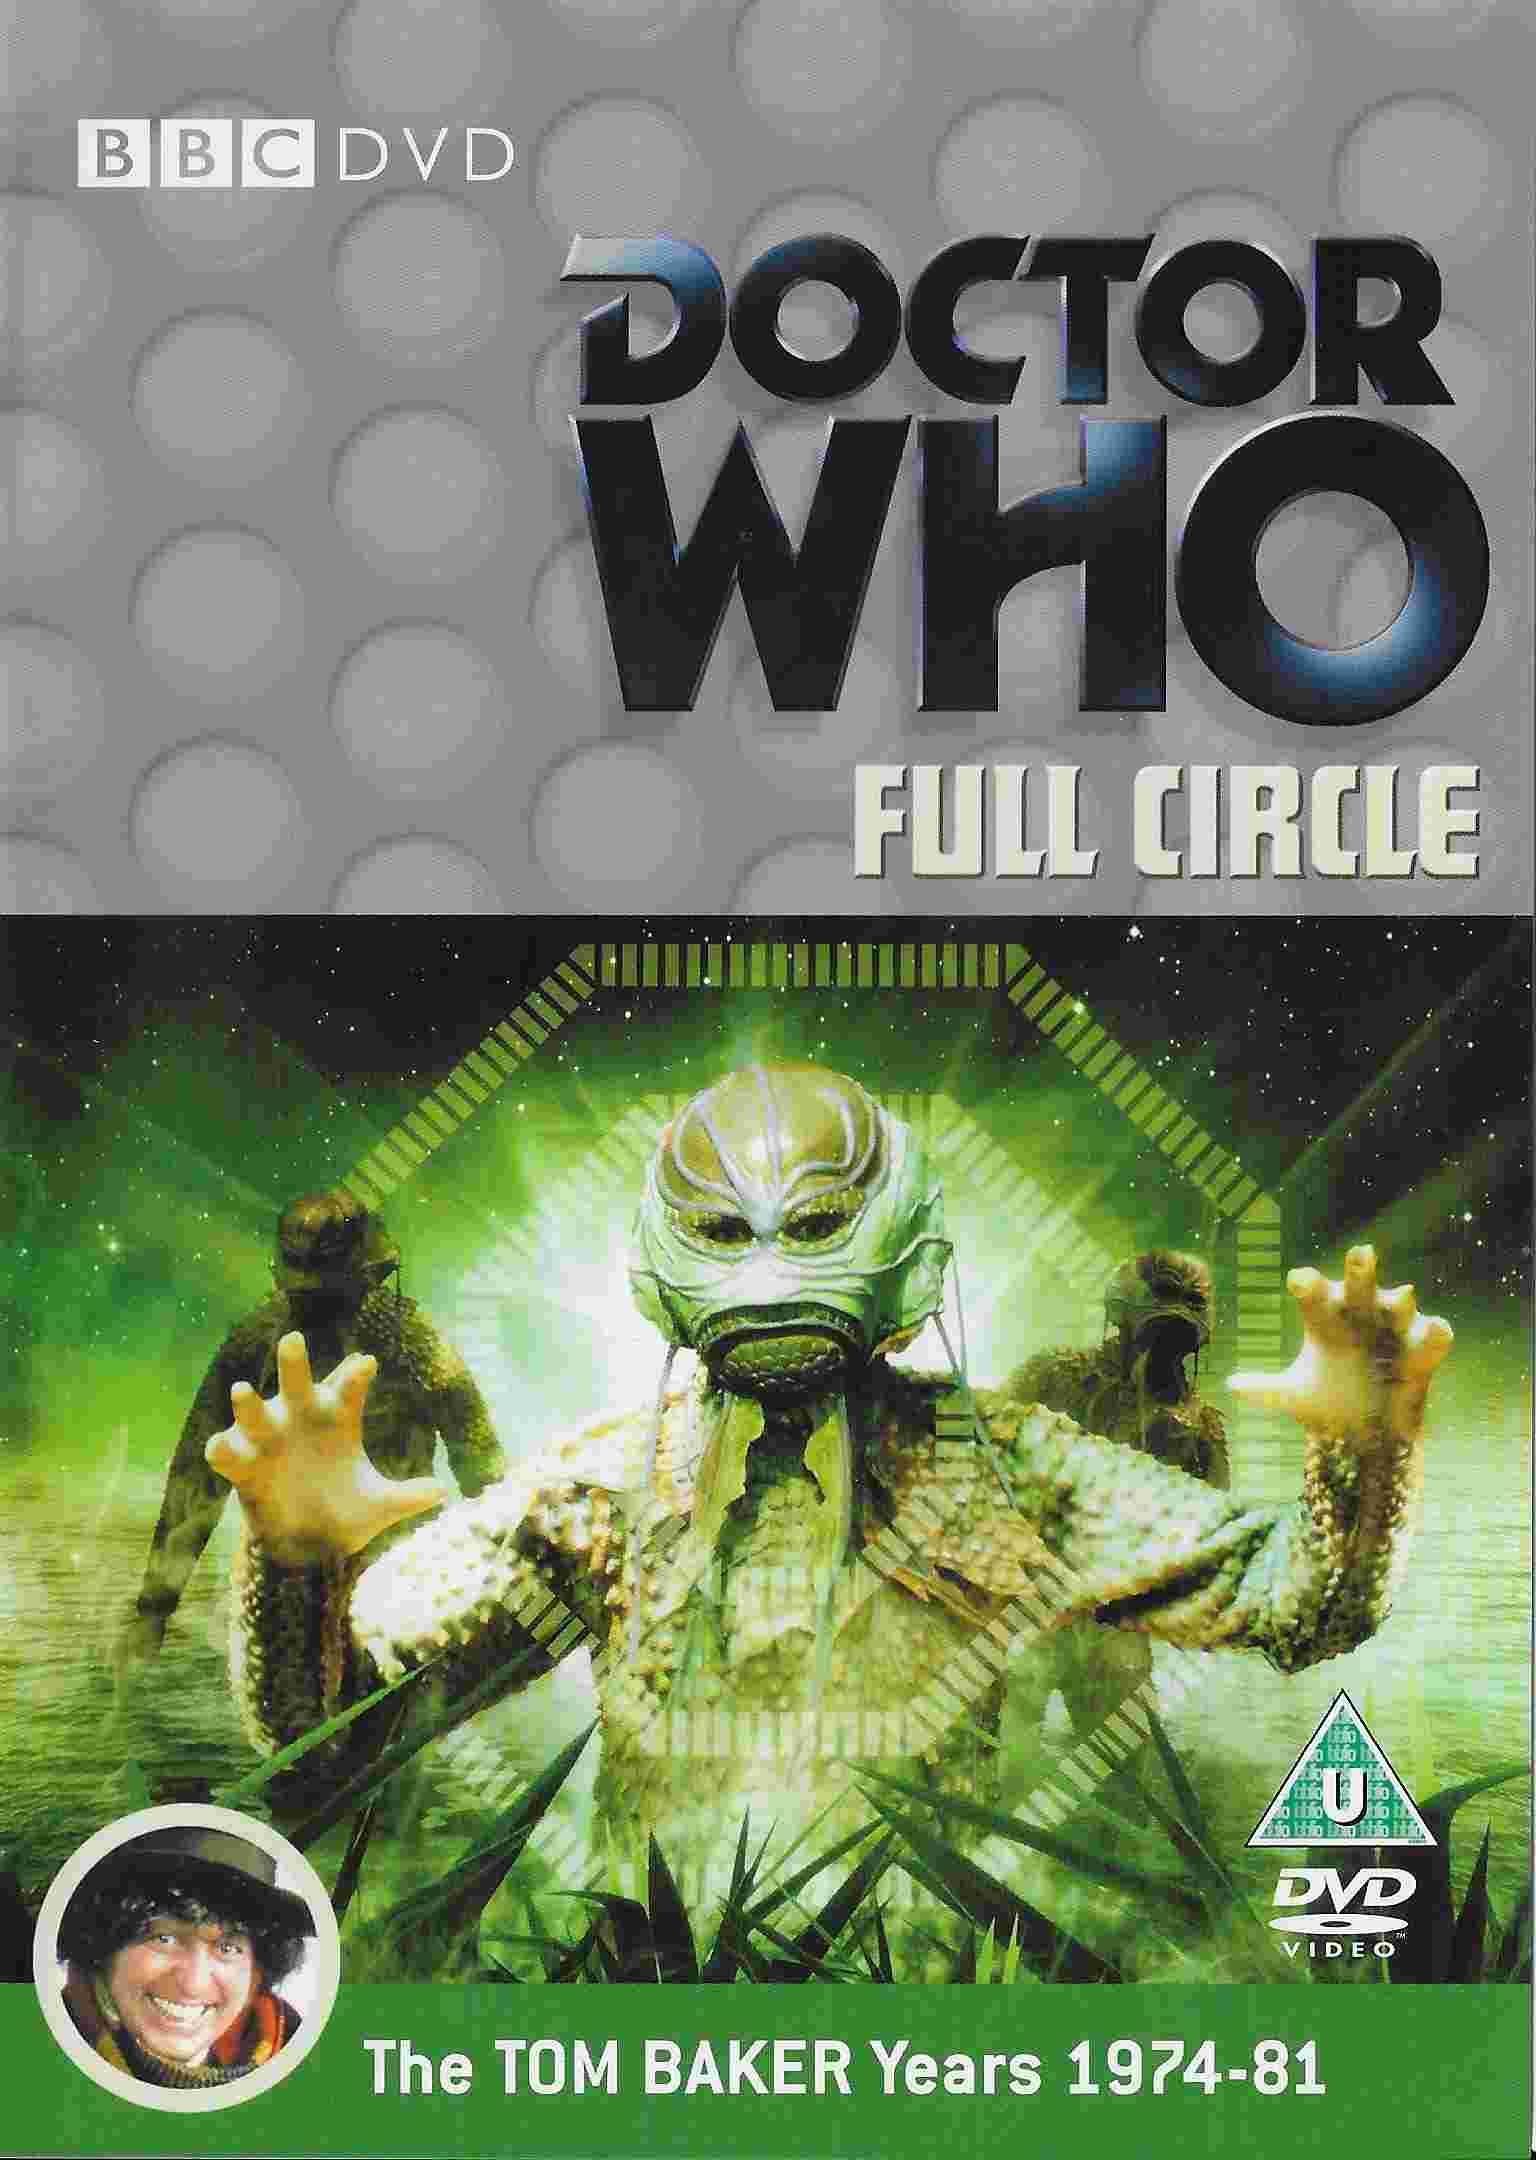 Picture of BBCDVD 1835A Doctor Who - Full Circle by artist Andrew Smith from the BBC dvds - Records and Tapes library